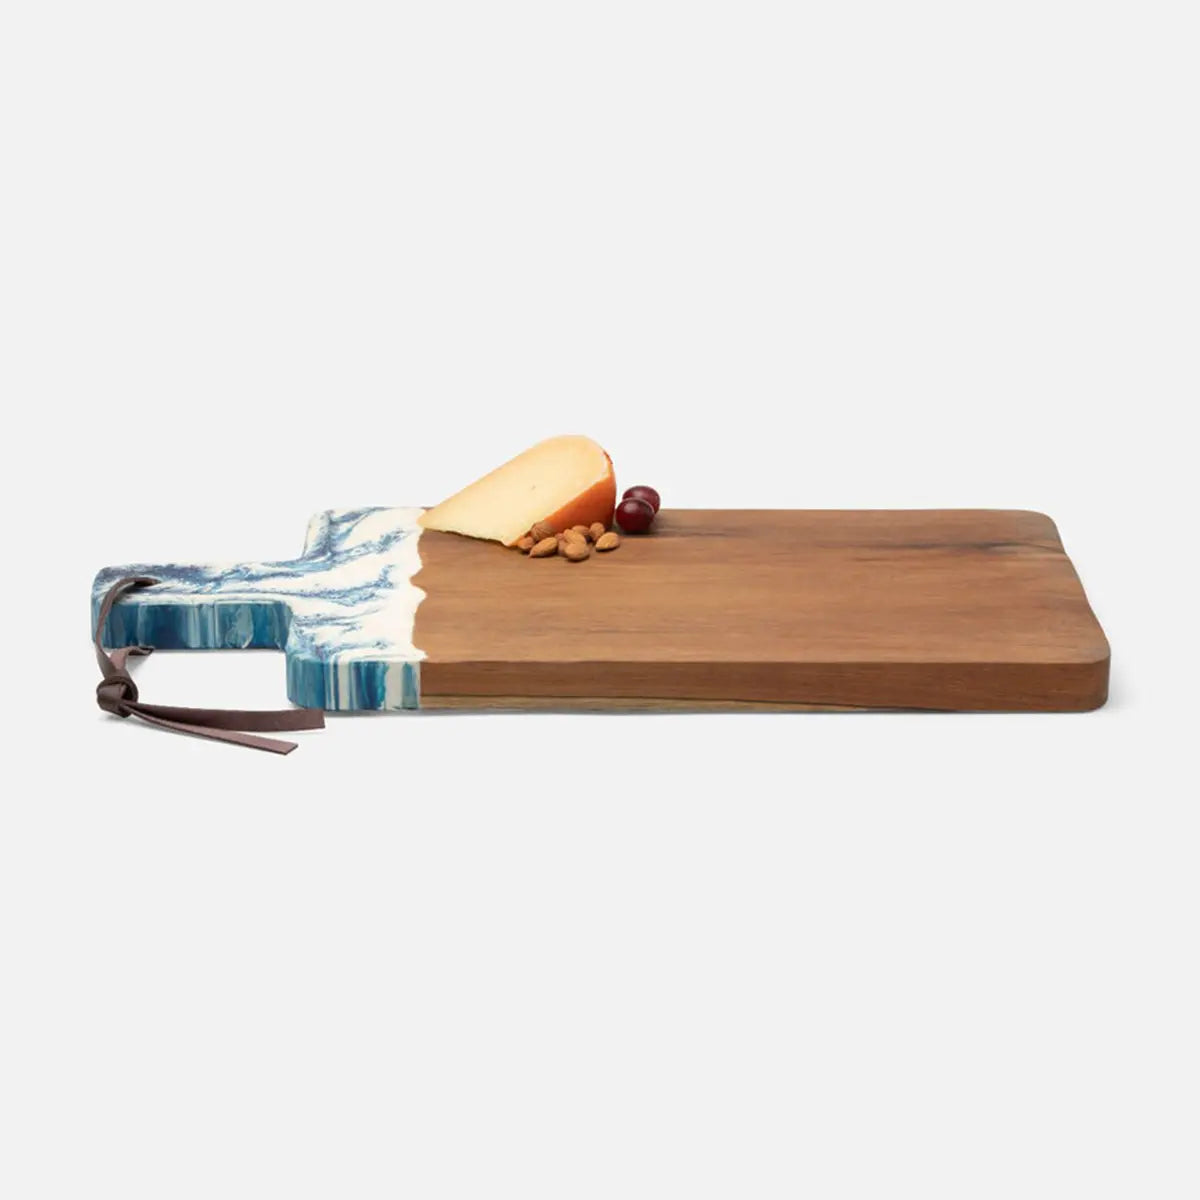 Blue Pheasant Austin Swirled Blue Resin and Natural Teak Serving Board in Medium size with cheese and nuts on top